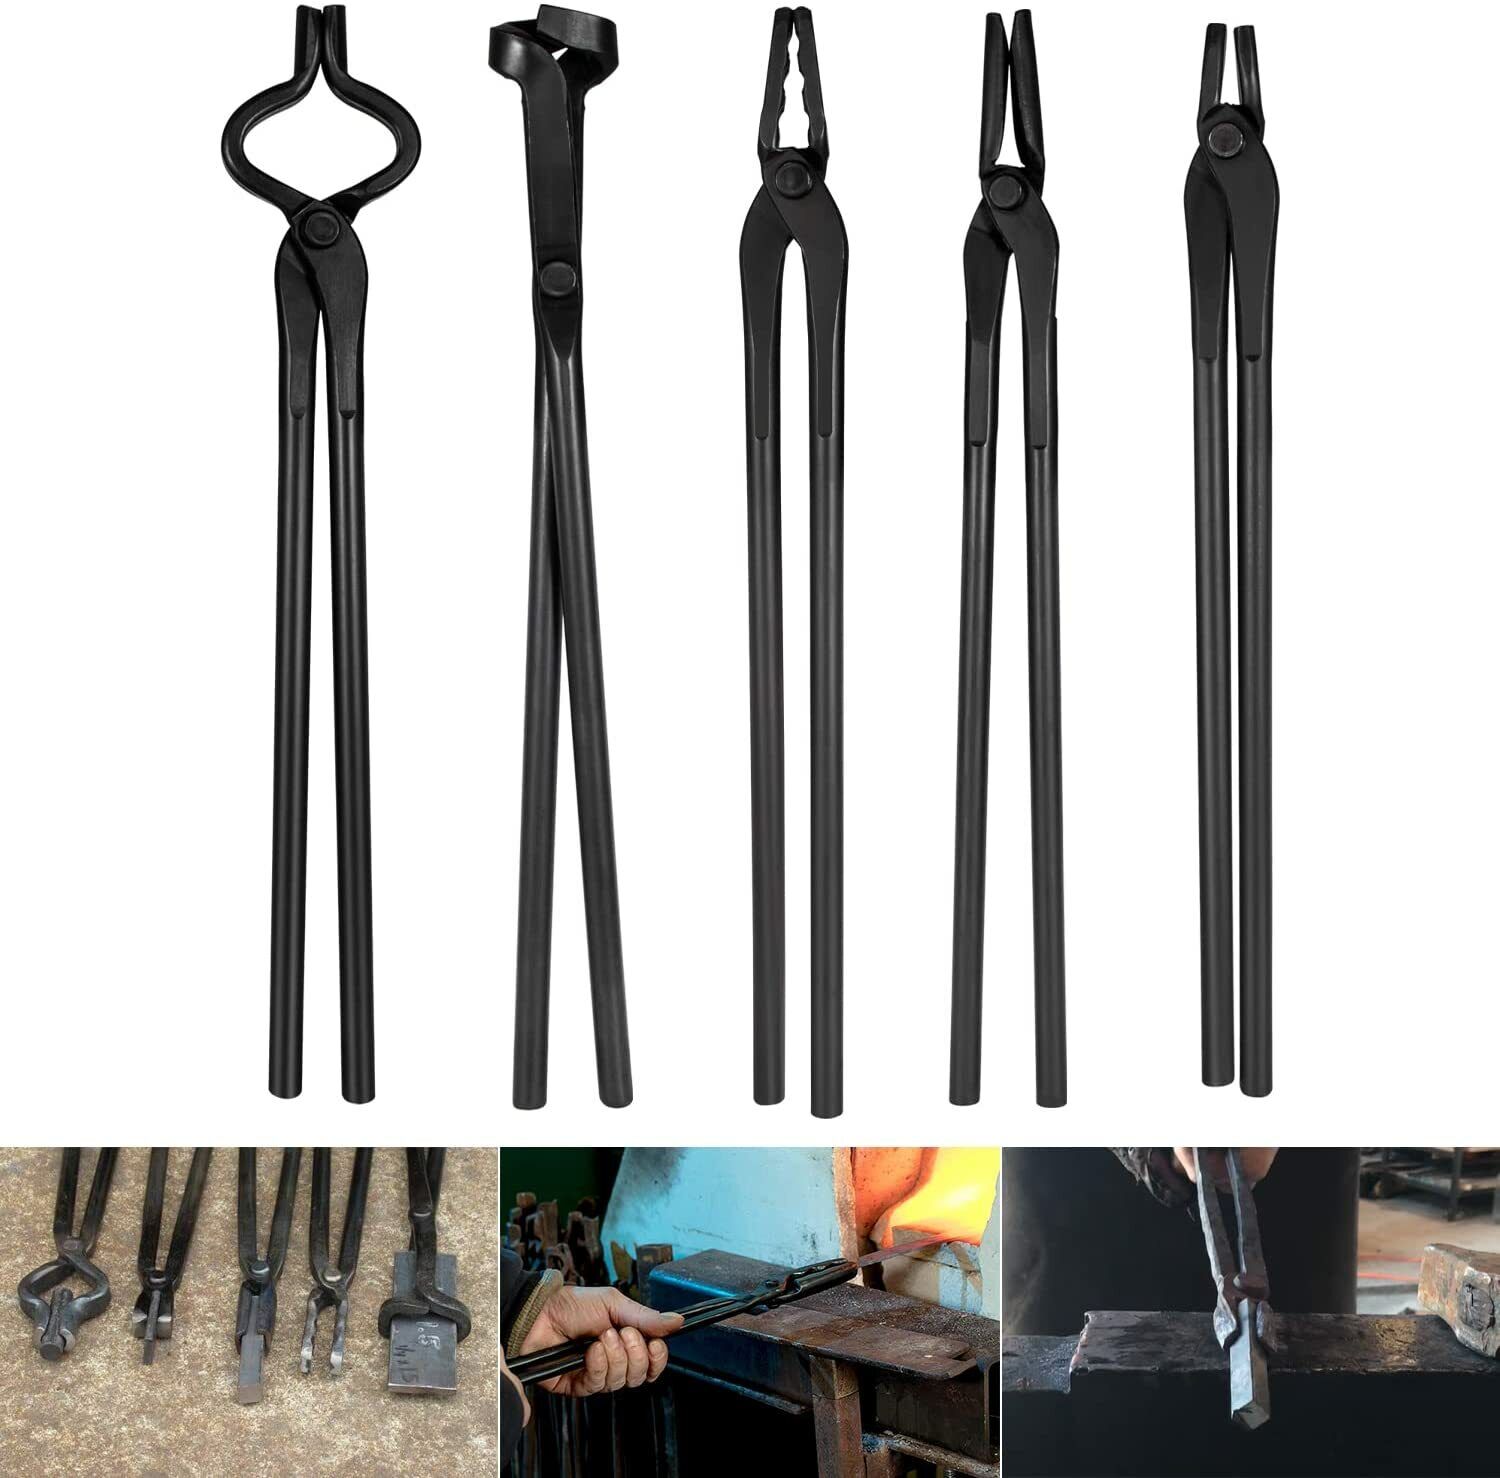 5PC Knife Making Tongs Set Bladesmith Blacksmith Tongs Tool for Anvil Vise Forge